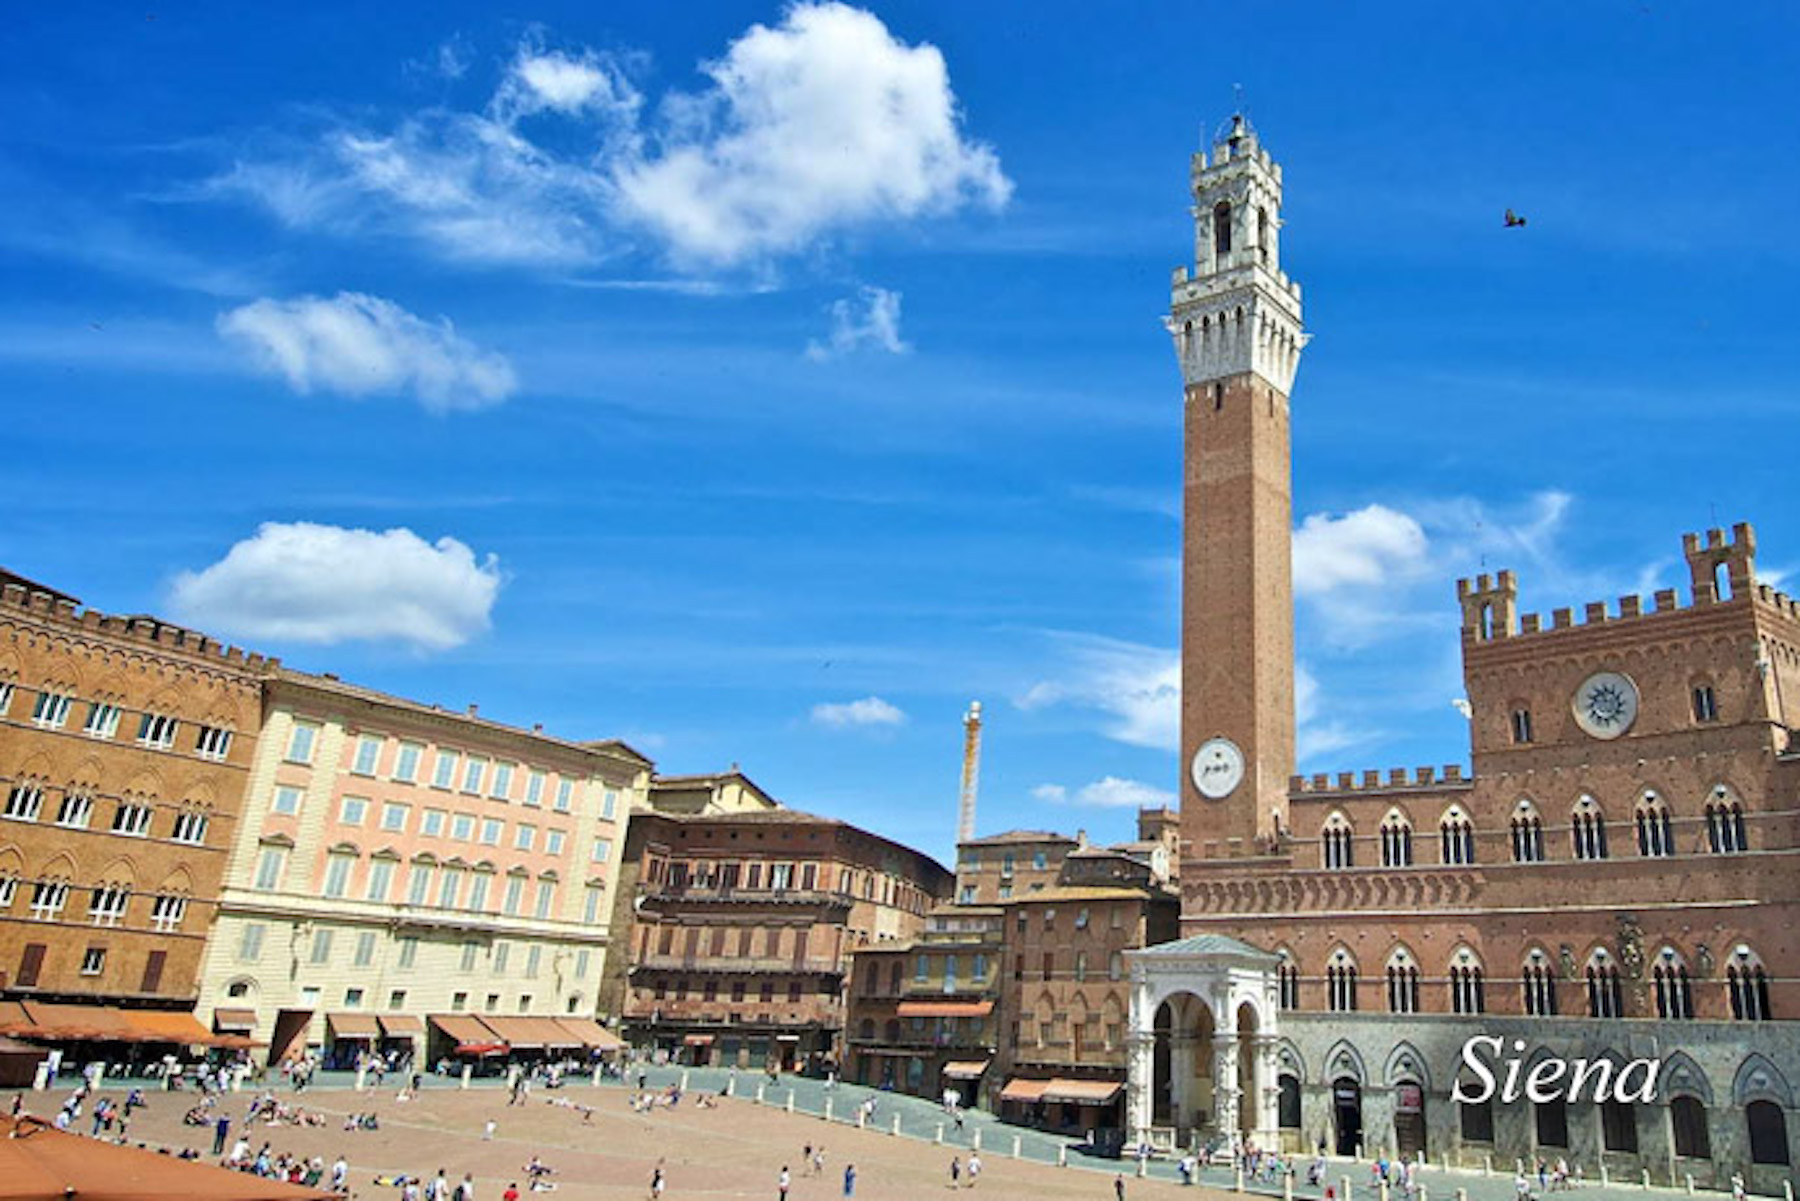 Siena Piazza del Campo - things to do in Siena Tuscany